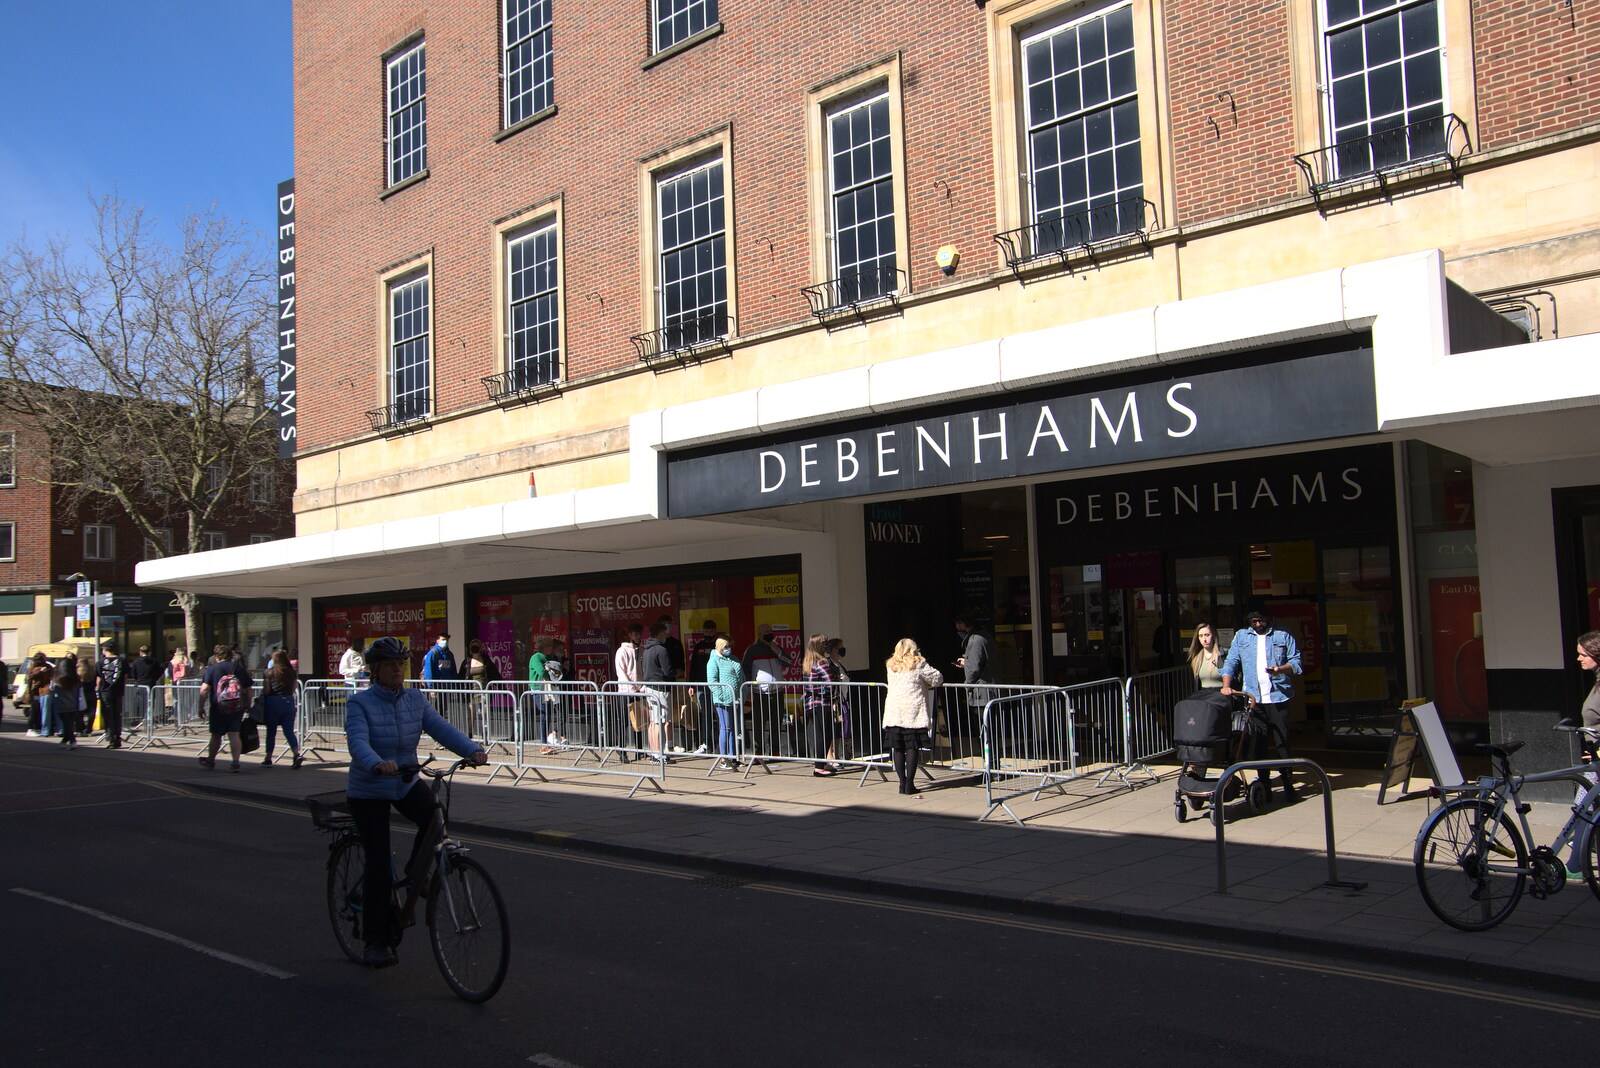 There's a bit more of a queue outside Debenhams from The Death of Debenhams, Rampant Horse Street, Norwich, Norfolk - 17th April 2021